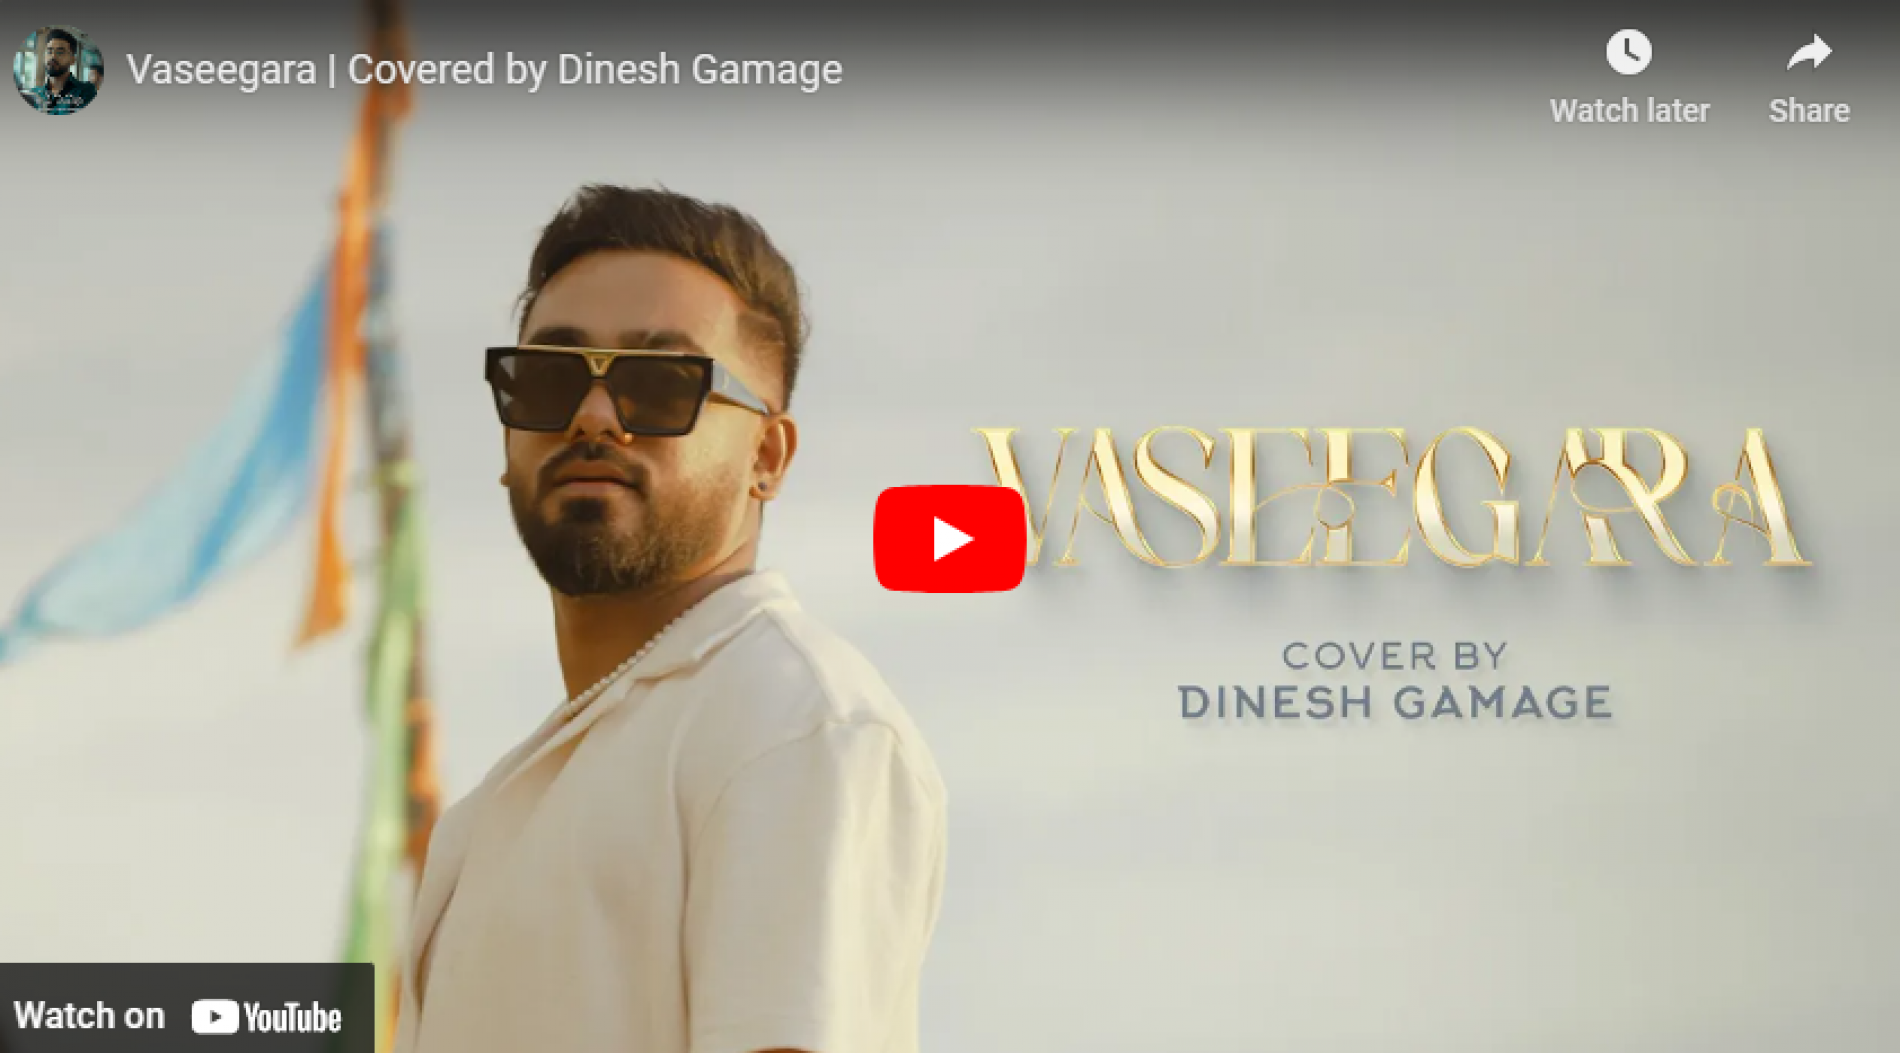 New Music : Vaseegara | Covered by Dinesh Gamage